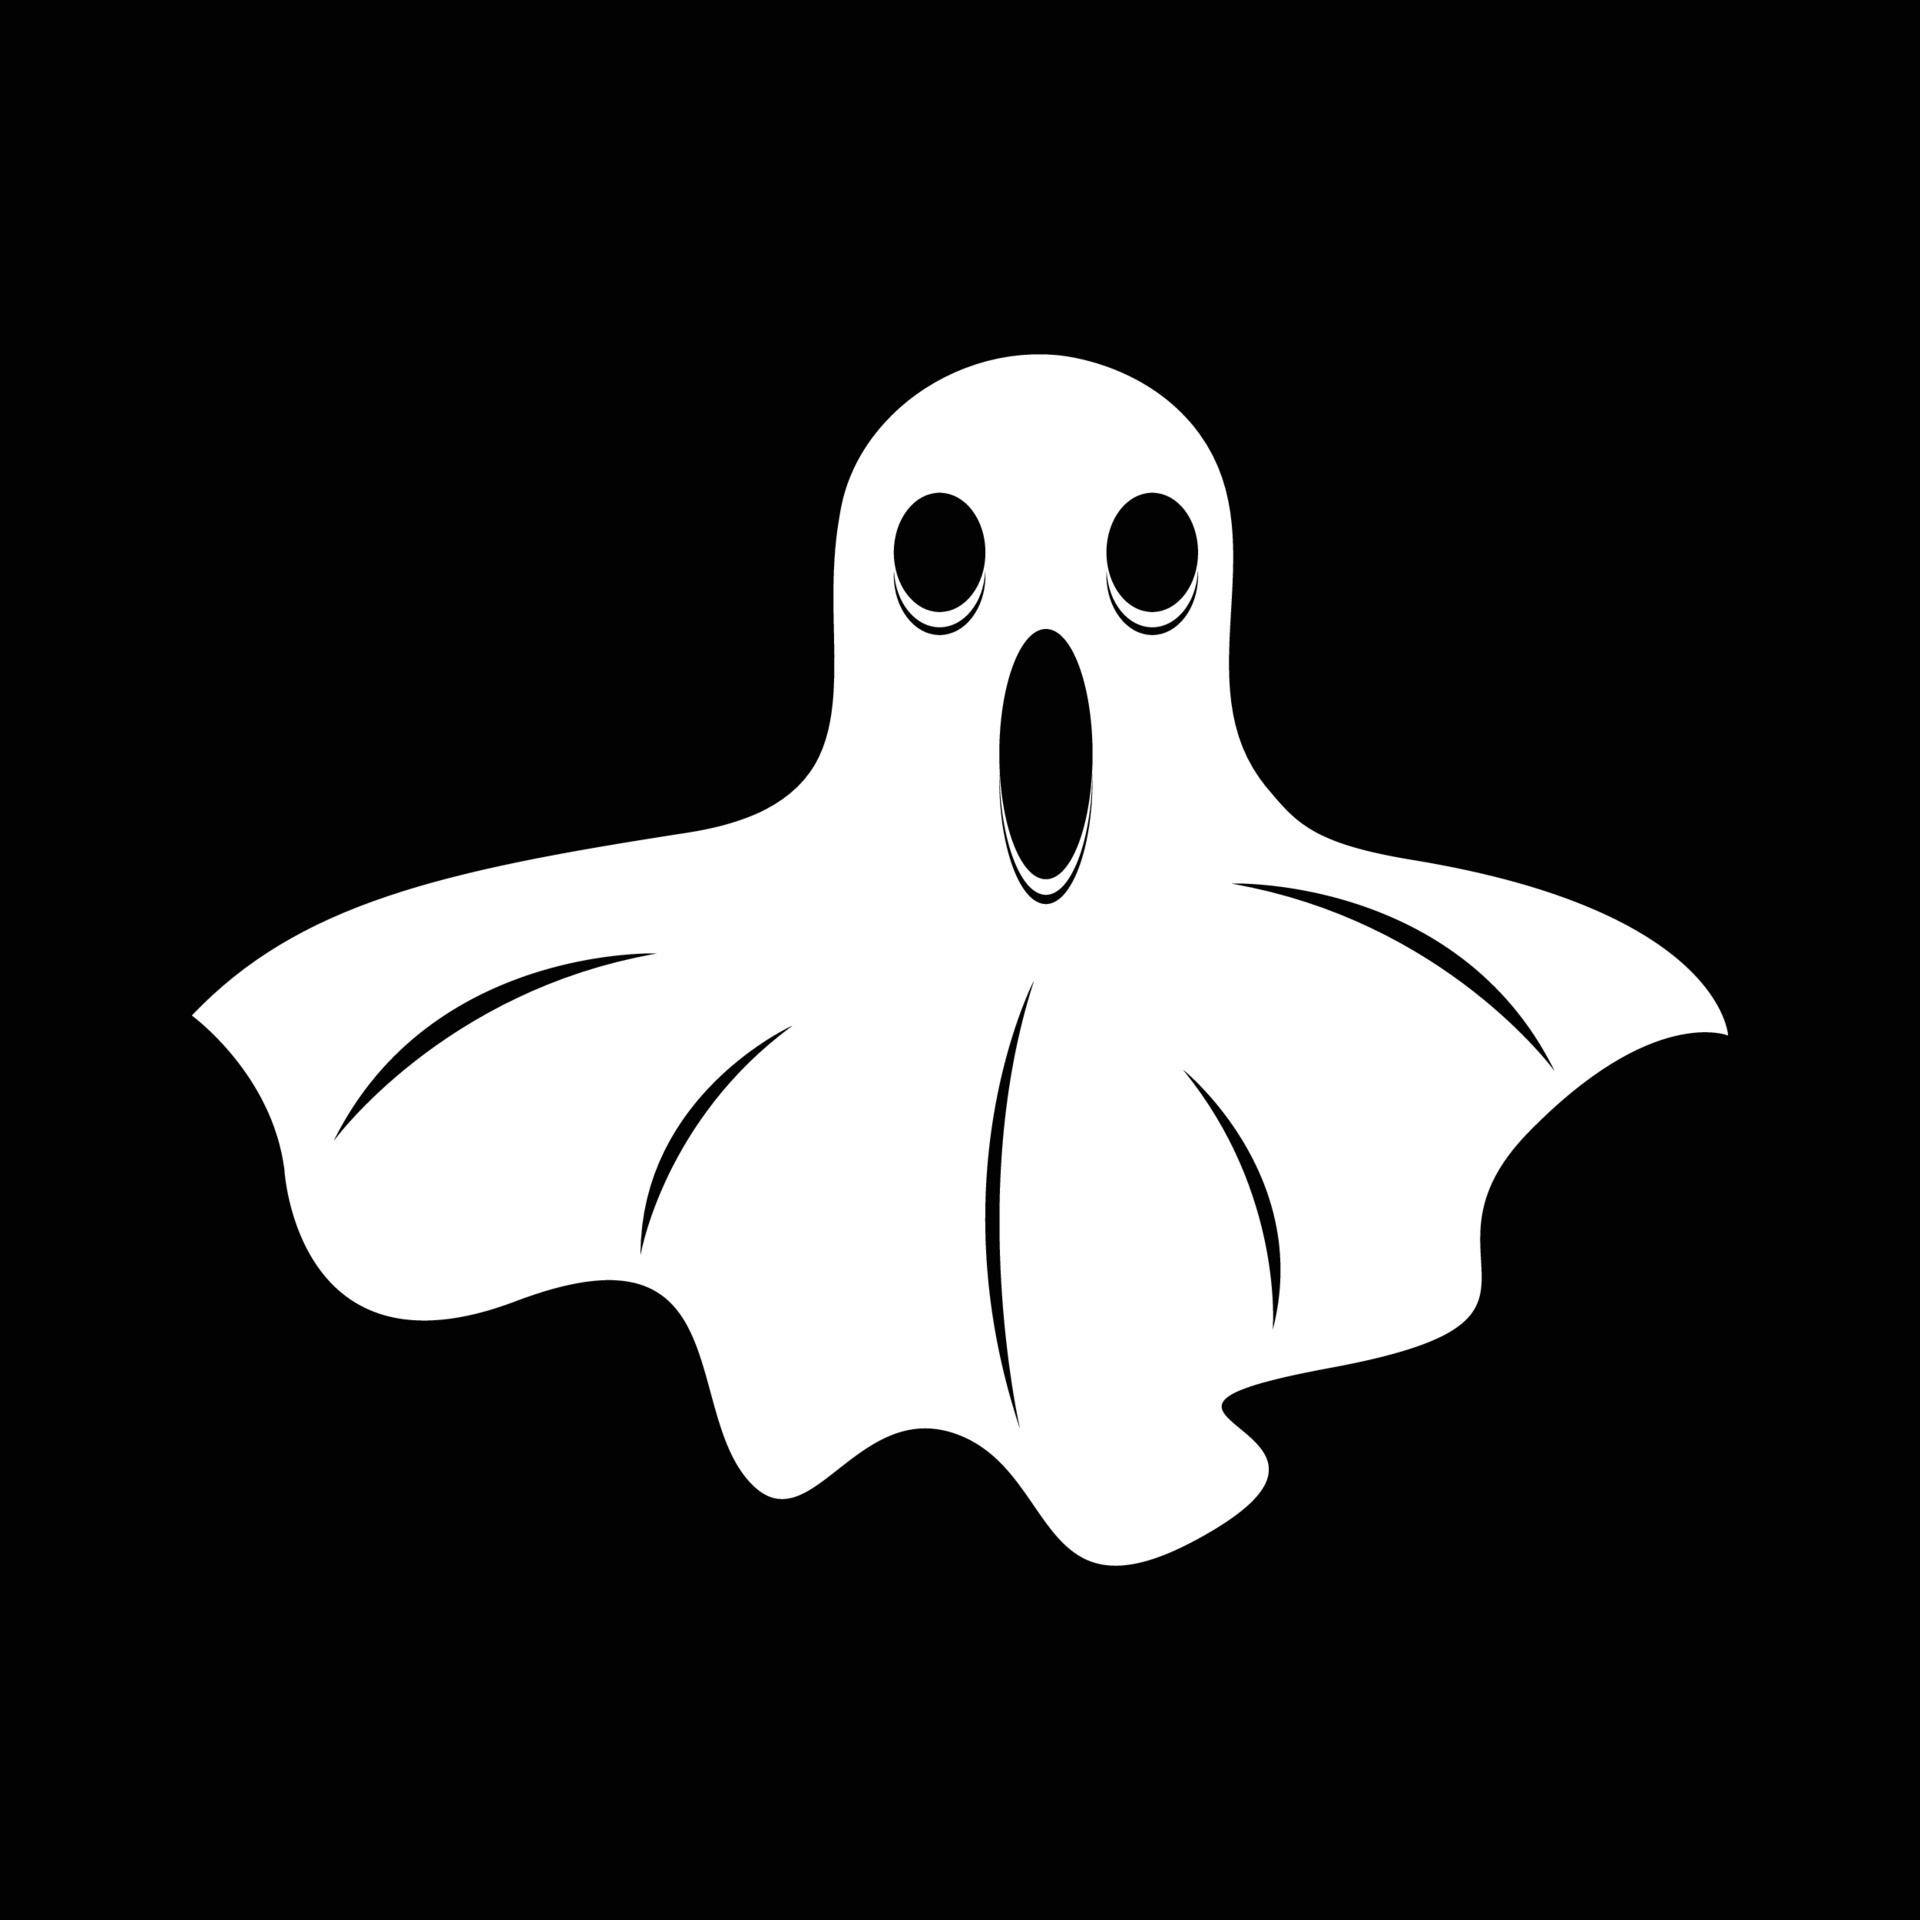 Halloween white ghost on a transparent background. Ghost with abstract  shapes. Halloween white ghost party element PNG. Scary ghost image with a scary  face. 11016941 PNG